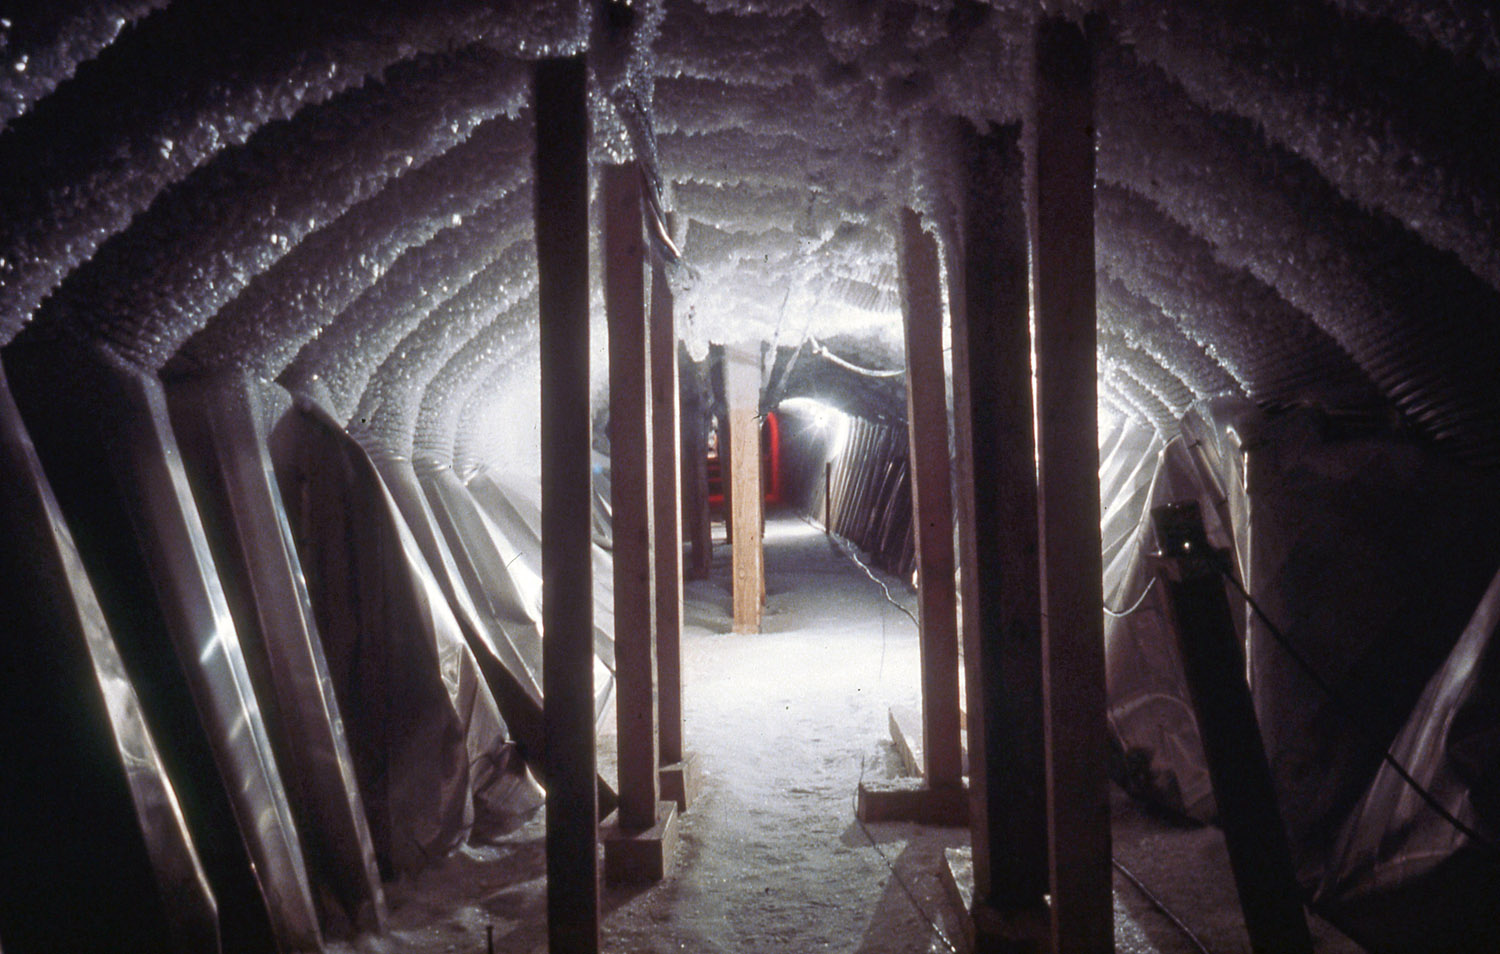 South Pole Station, Antarctica -  station Buried under 40 ft of Ice